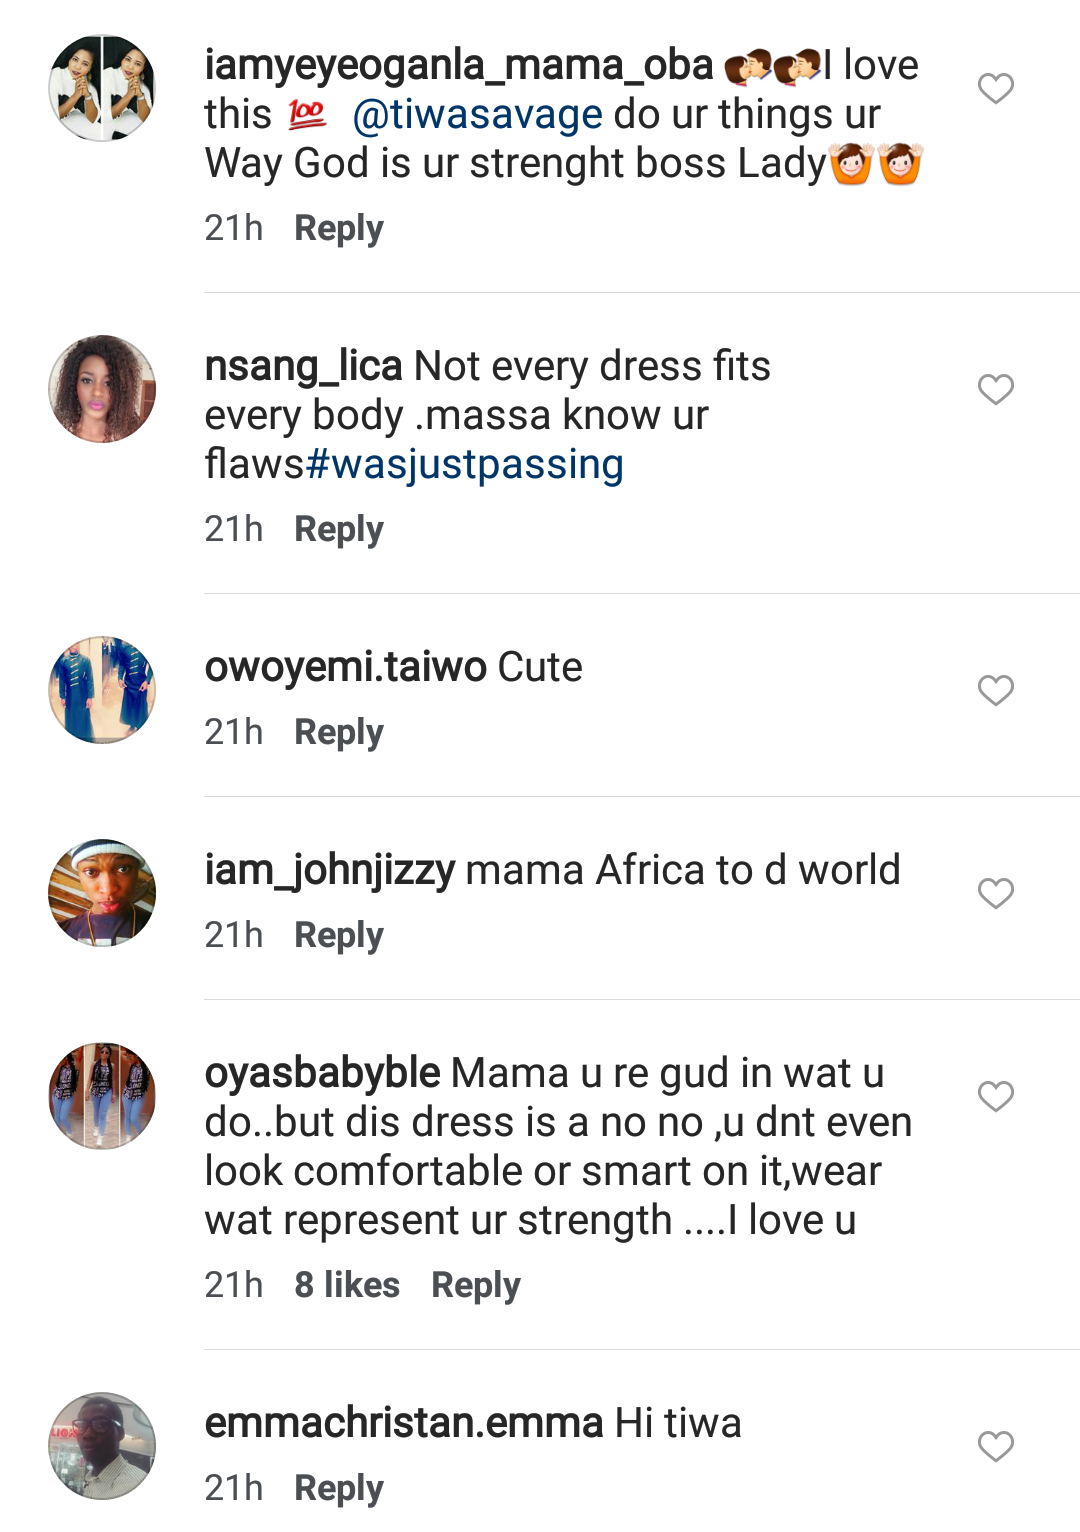 Insta-users Blast Tiwa Savage Endlessly Over Cleevage Revealing Dress